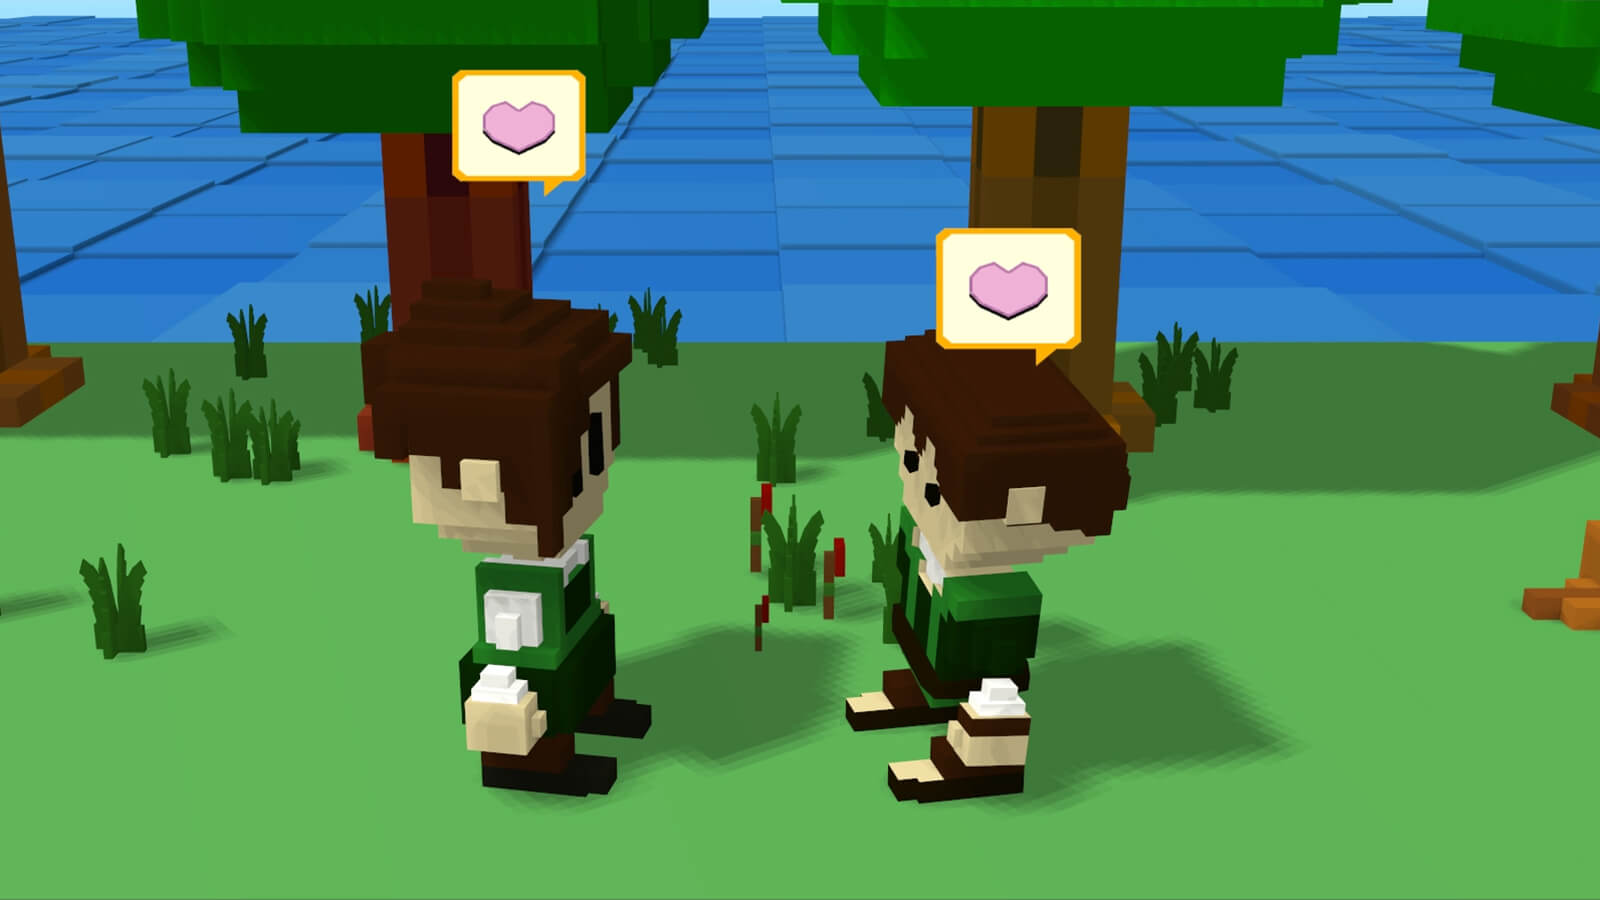 Two blocky villagers speak to each other with heart icons for speech bubbles.